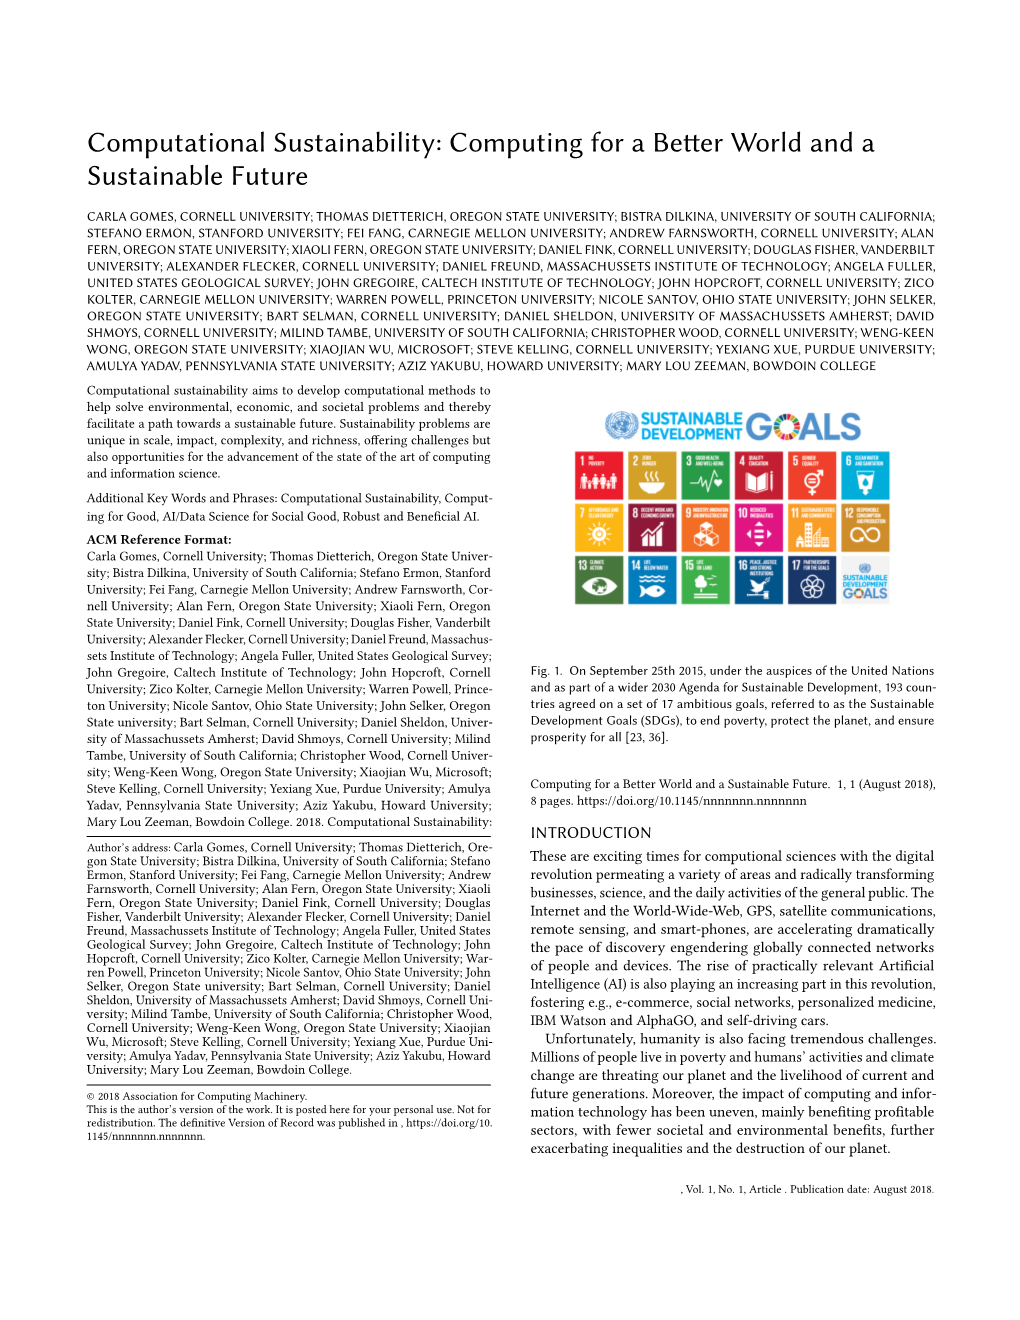 Computational Sustainability: Computing for a Better World and a Sustainable Future